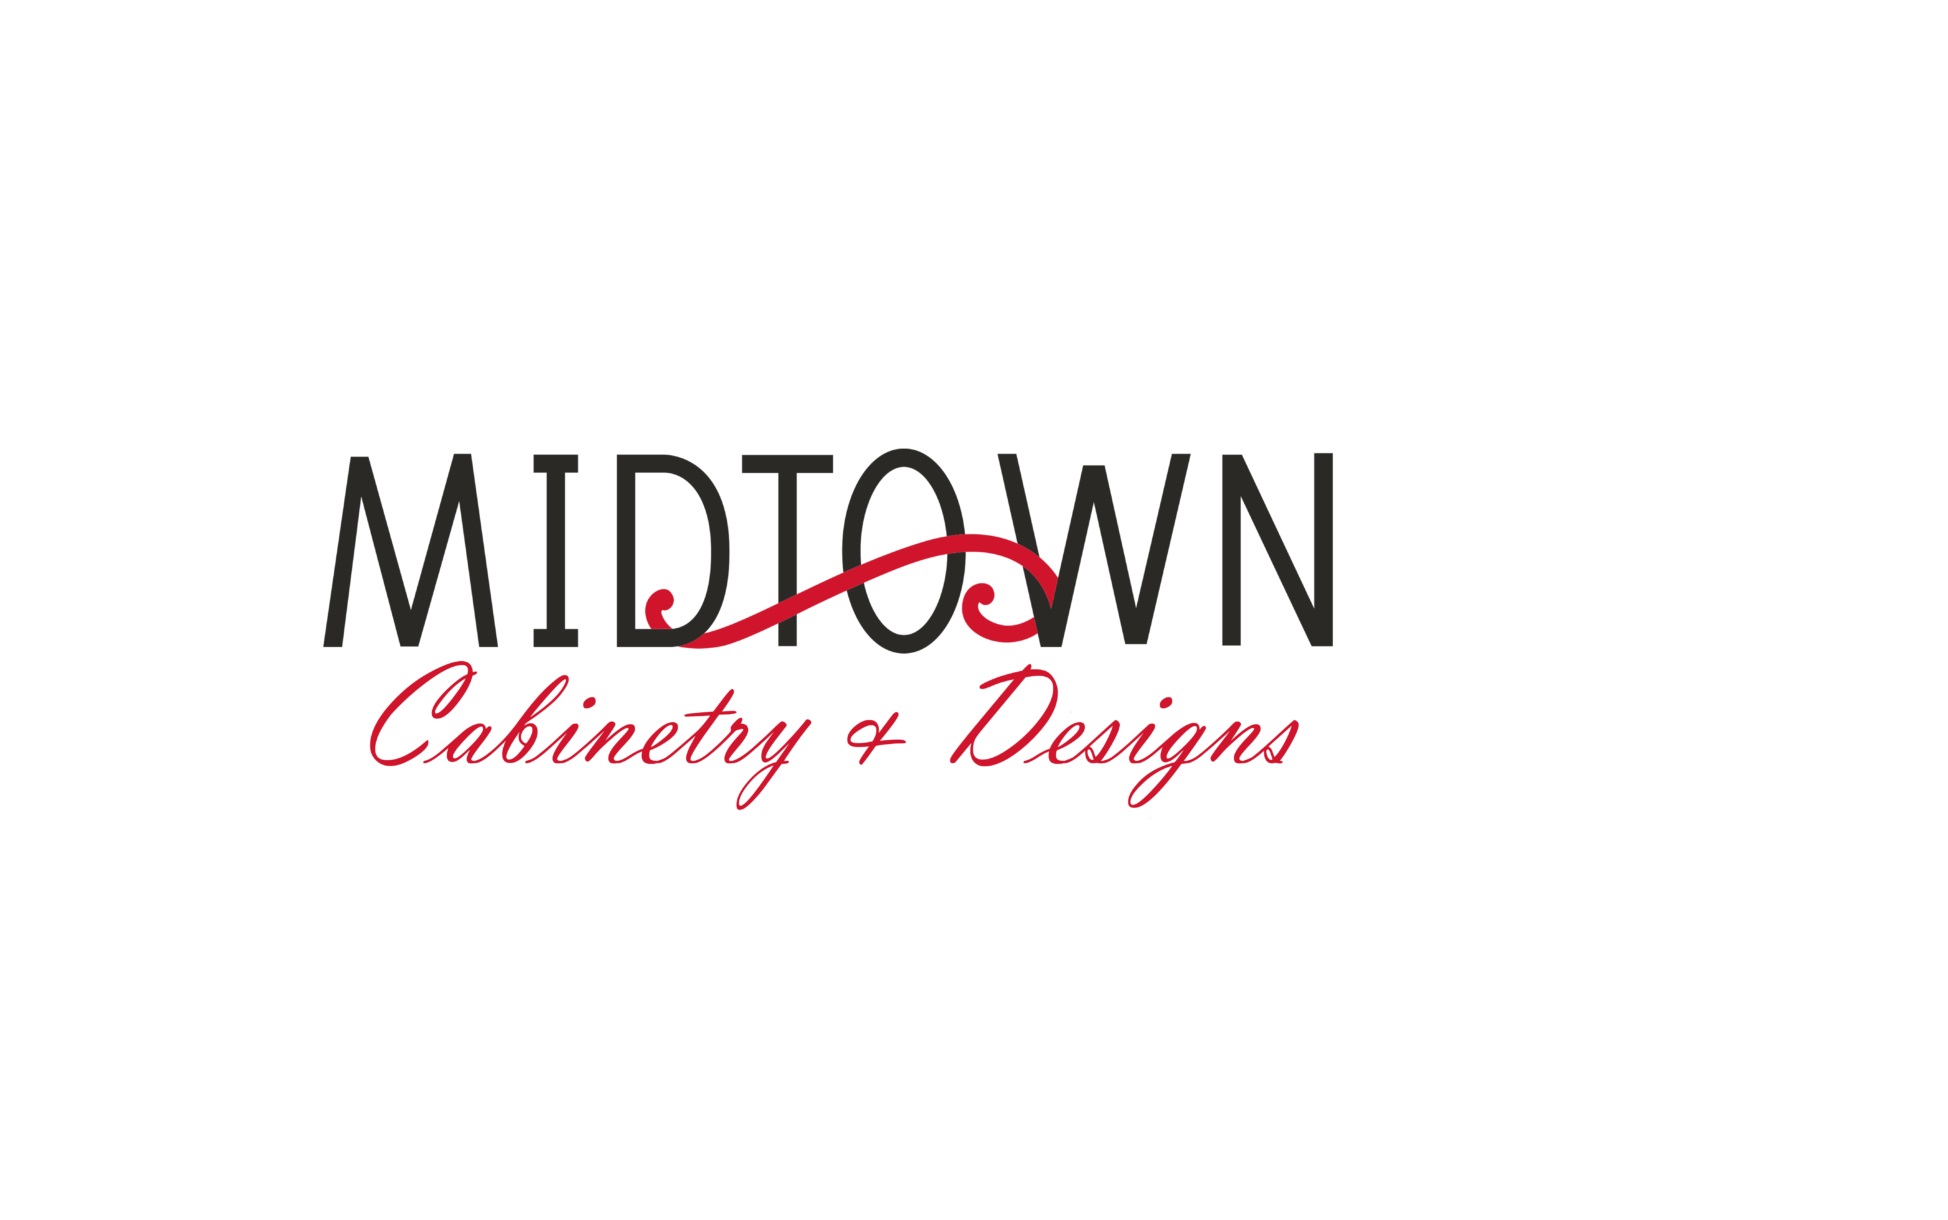 Midtown Cabinetry & Designs